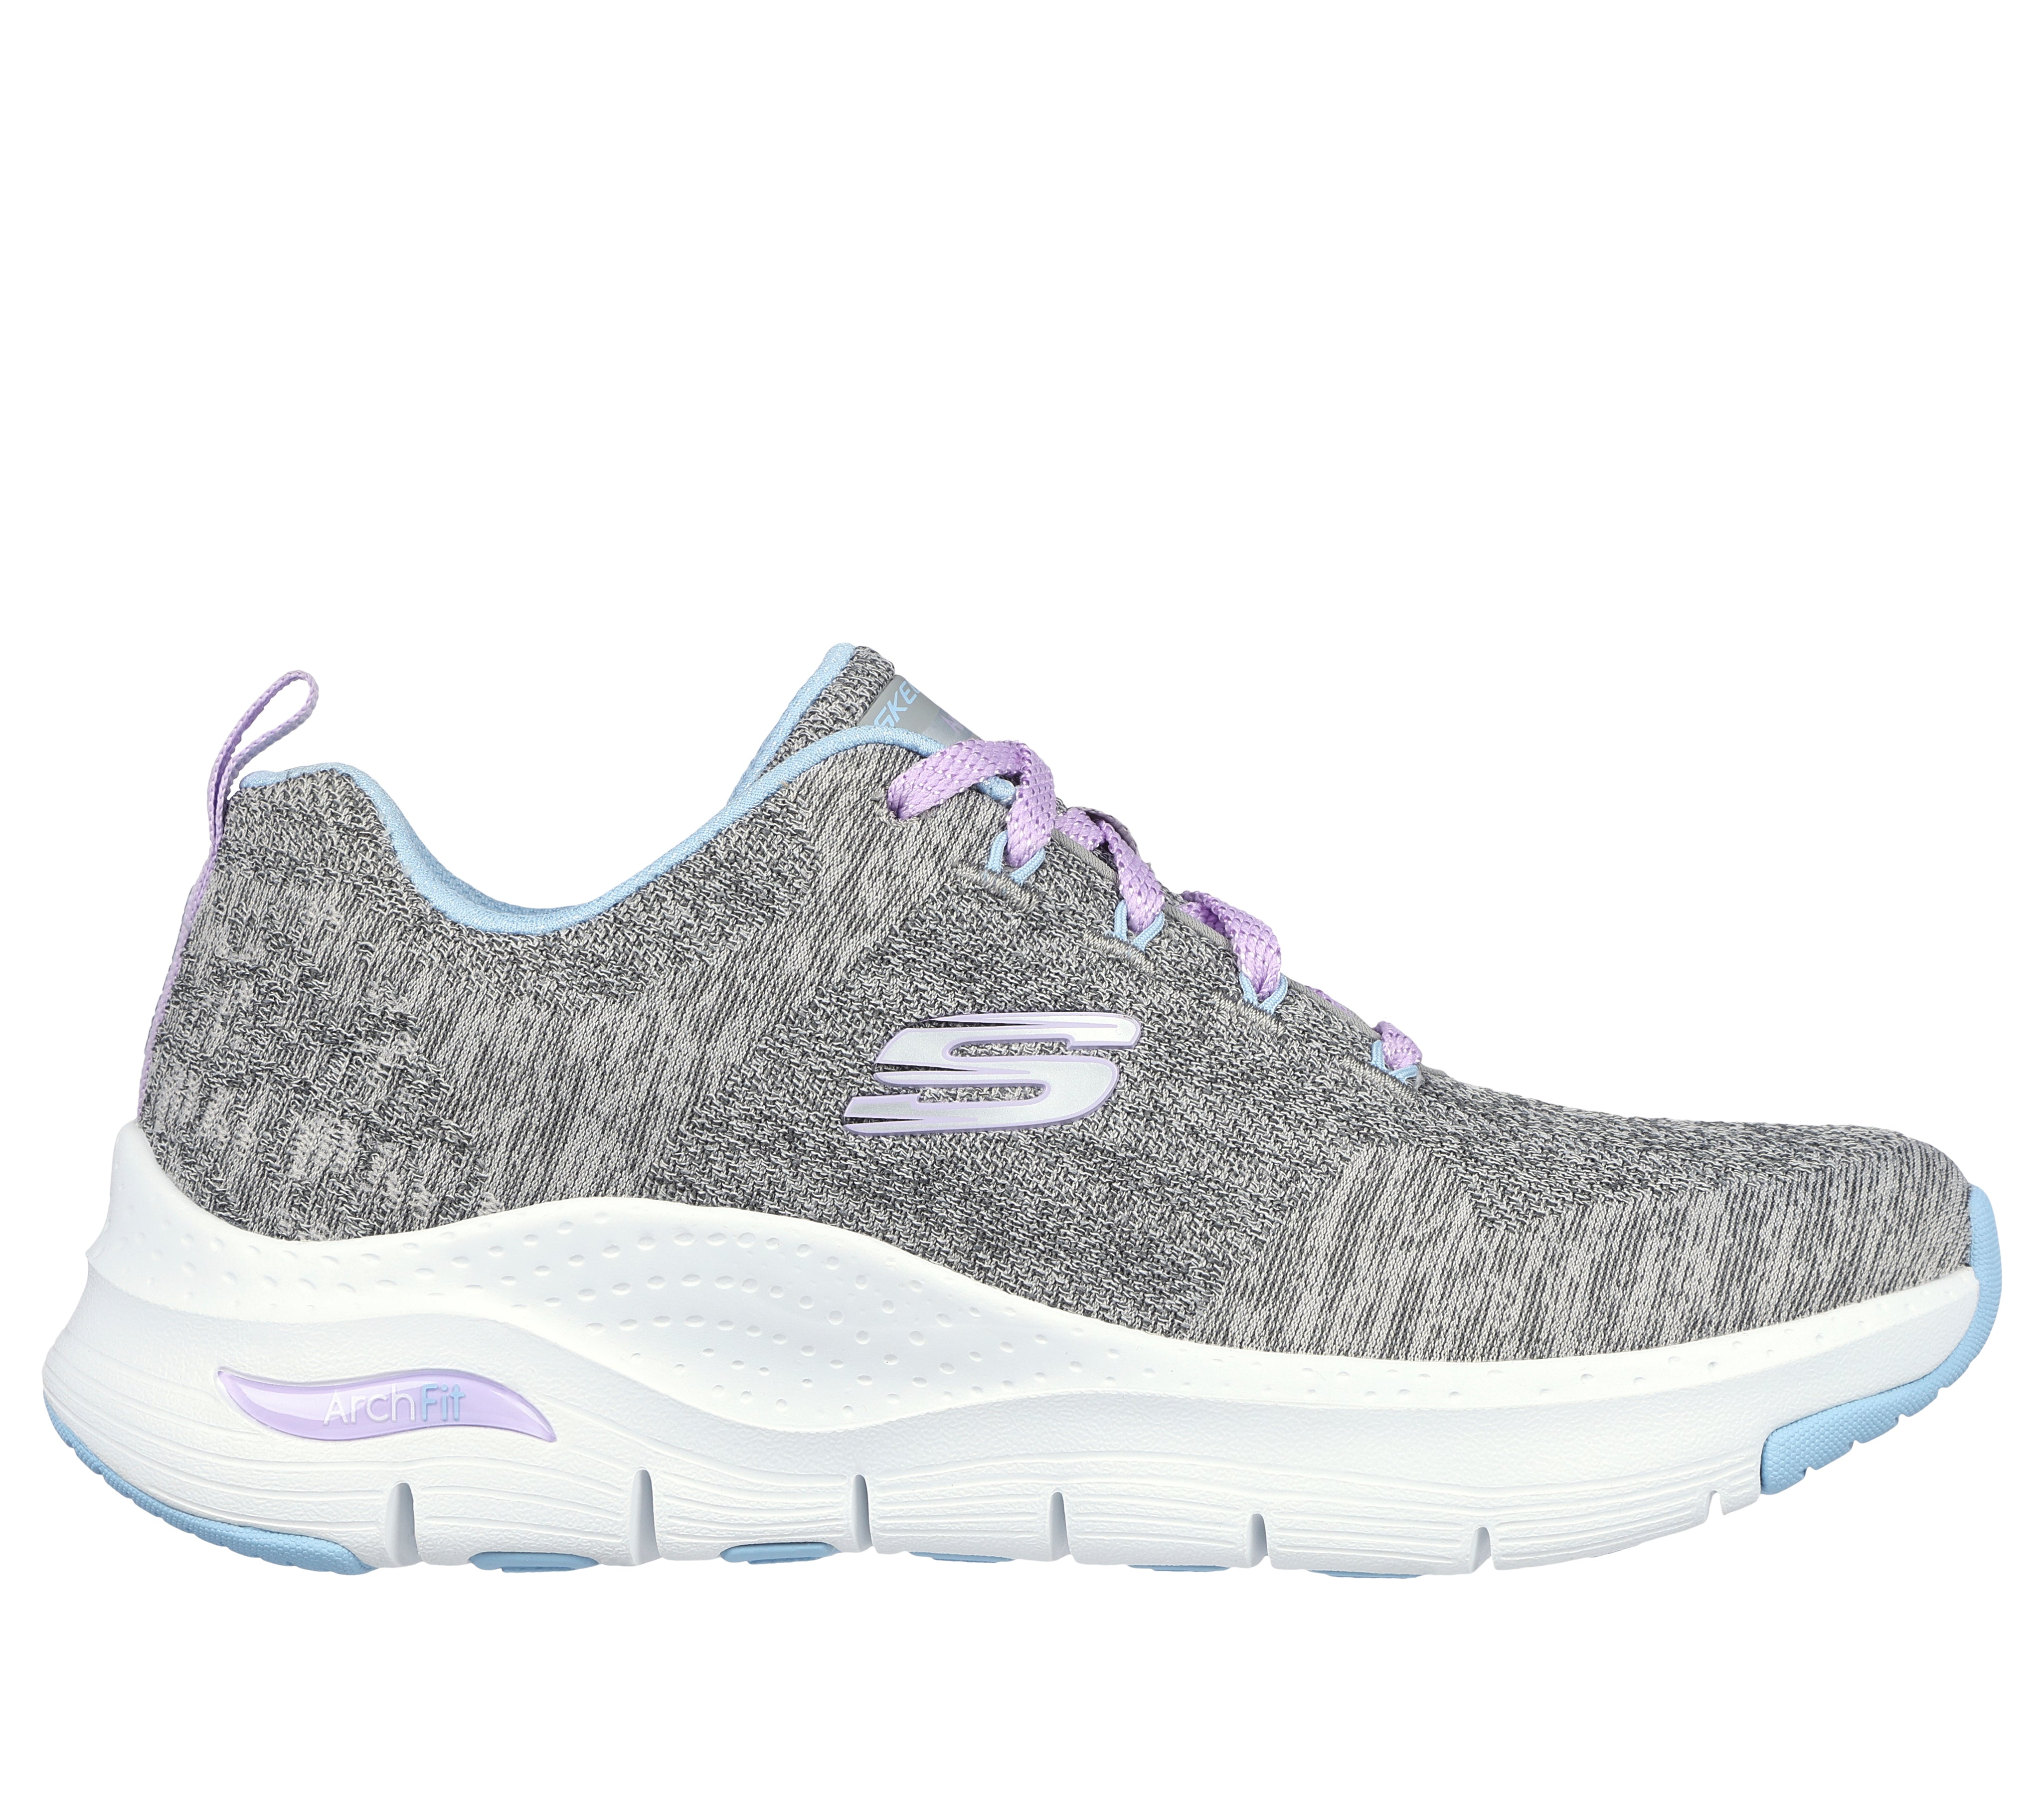 149414 - SKECHERS ARCH FIT - COMFY WAVE